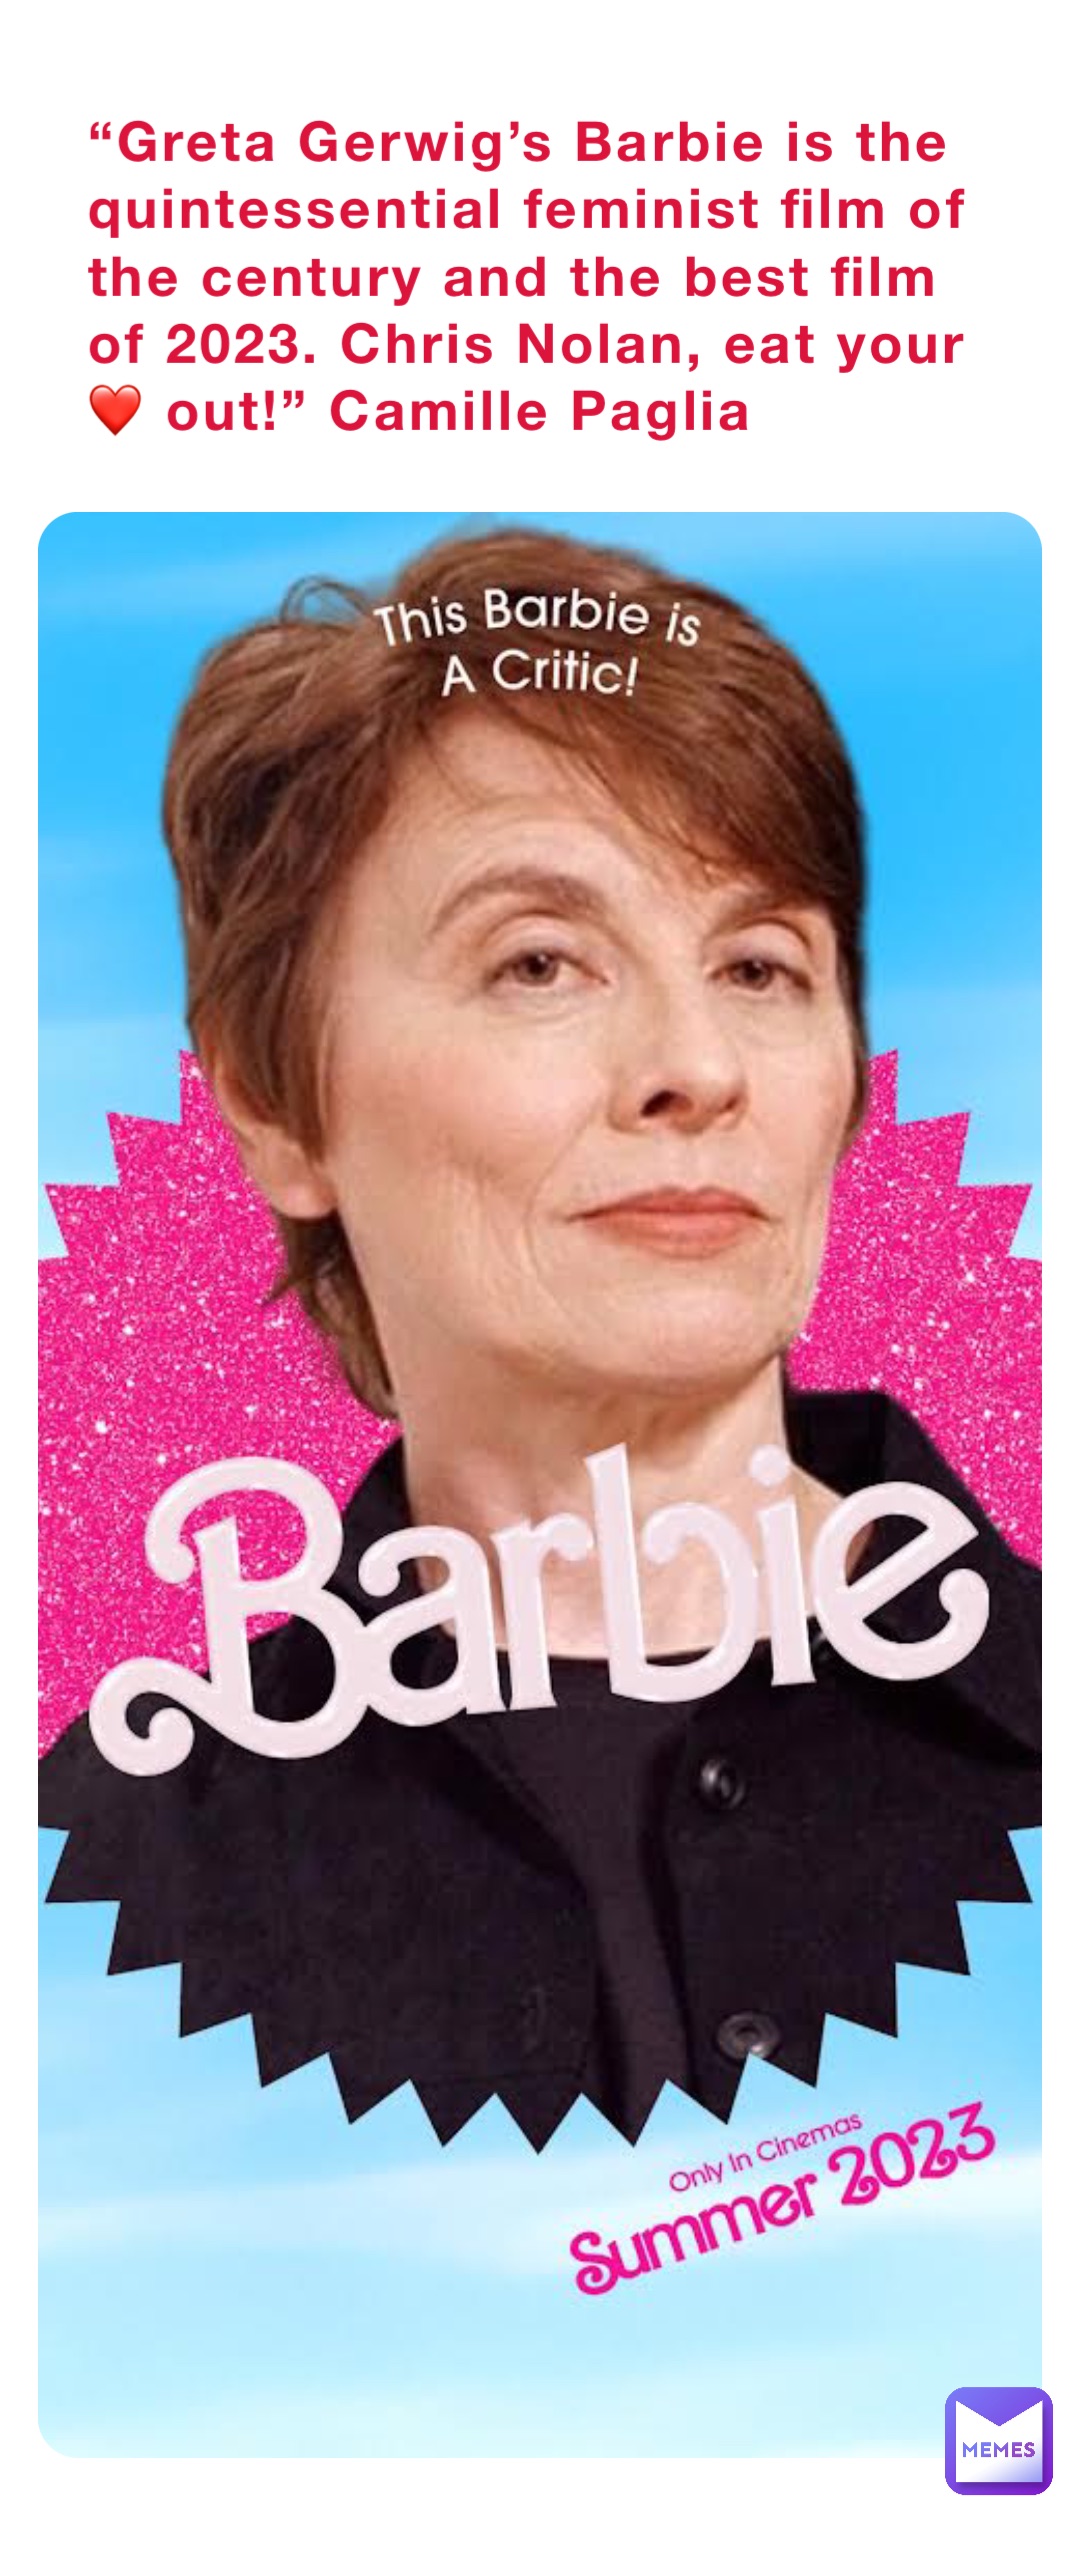 “Greta Gerwig’s Barbie is the quintessential feminist film of the century and the best film of 2023. Chris Nolan, eat your ❤️ out!” Camille Paglia